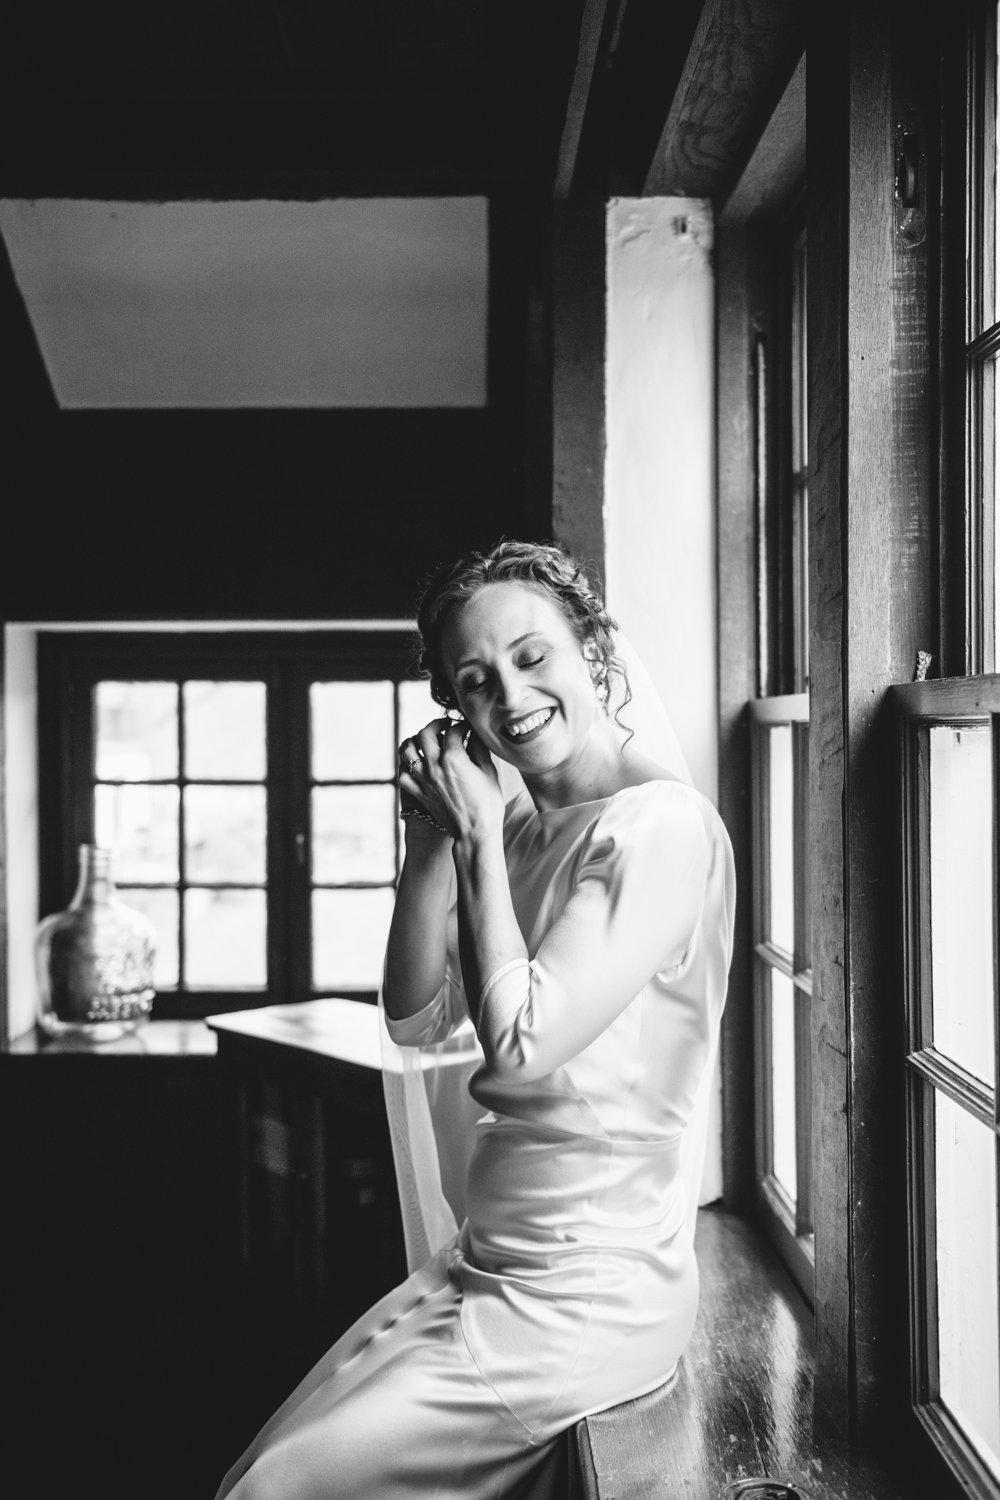 Bride sits on the window sill in her wedding dress and smiles as she adjust her earring.

Upstate New York Wedding Photography. Cold Spring NY Wedding Photography. Luxury Local Wedding Photographer. Destination Wedding Photographer.